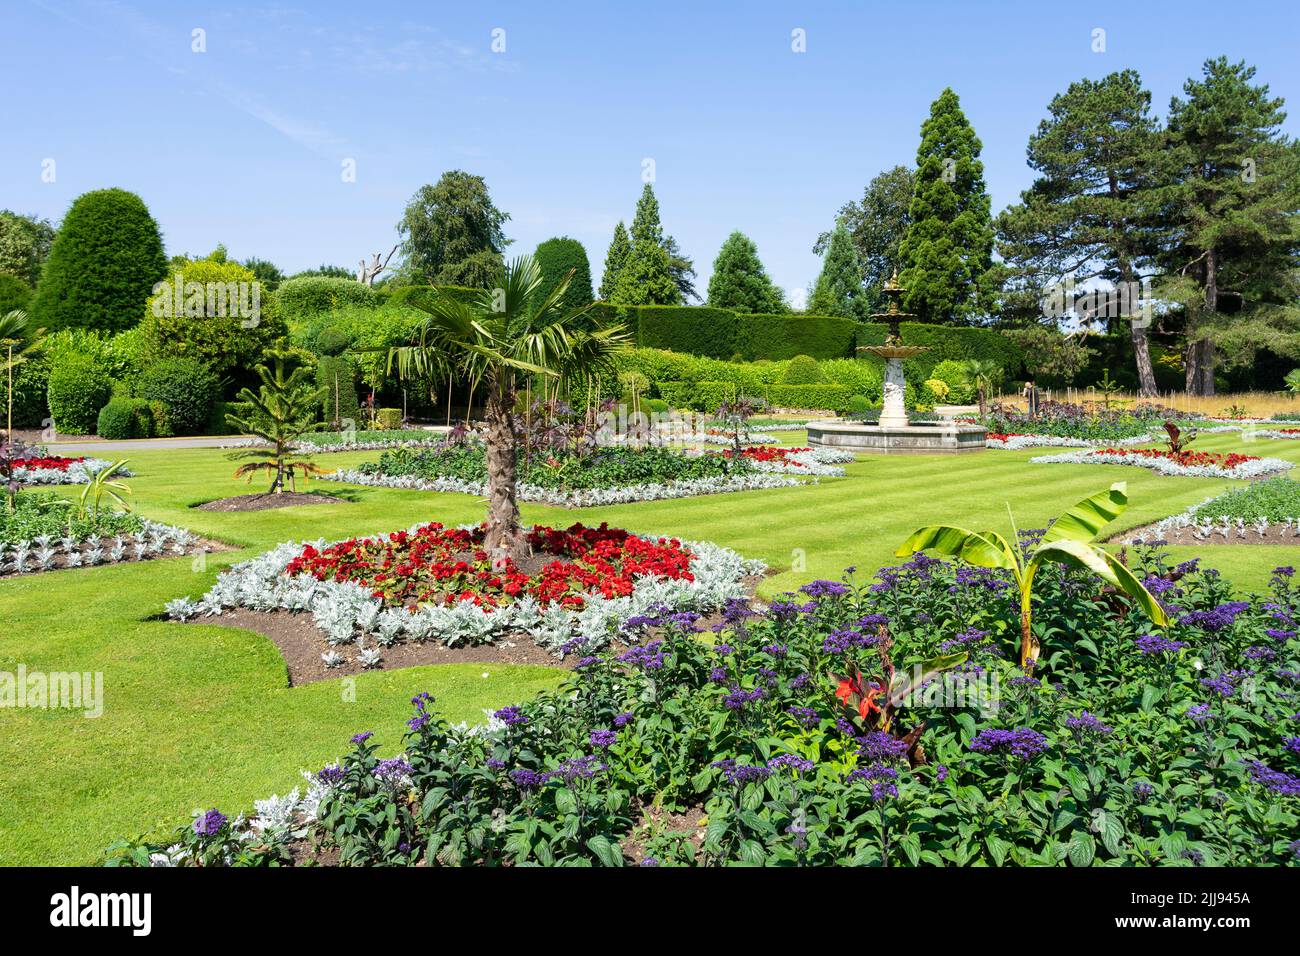 Formal gardens or Parterre at Brodsworth Hall and Gardens near Doncaster South Yorkshire England UK GB Europe Stock Photo